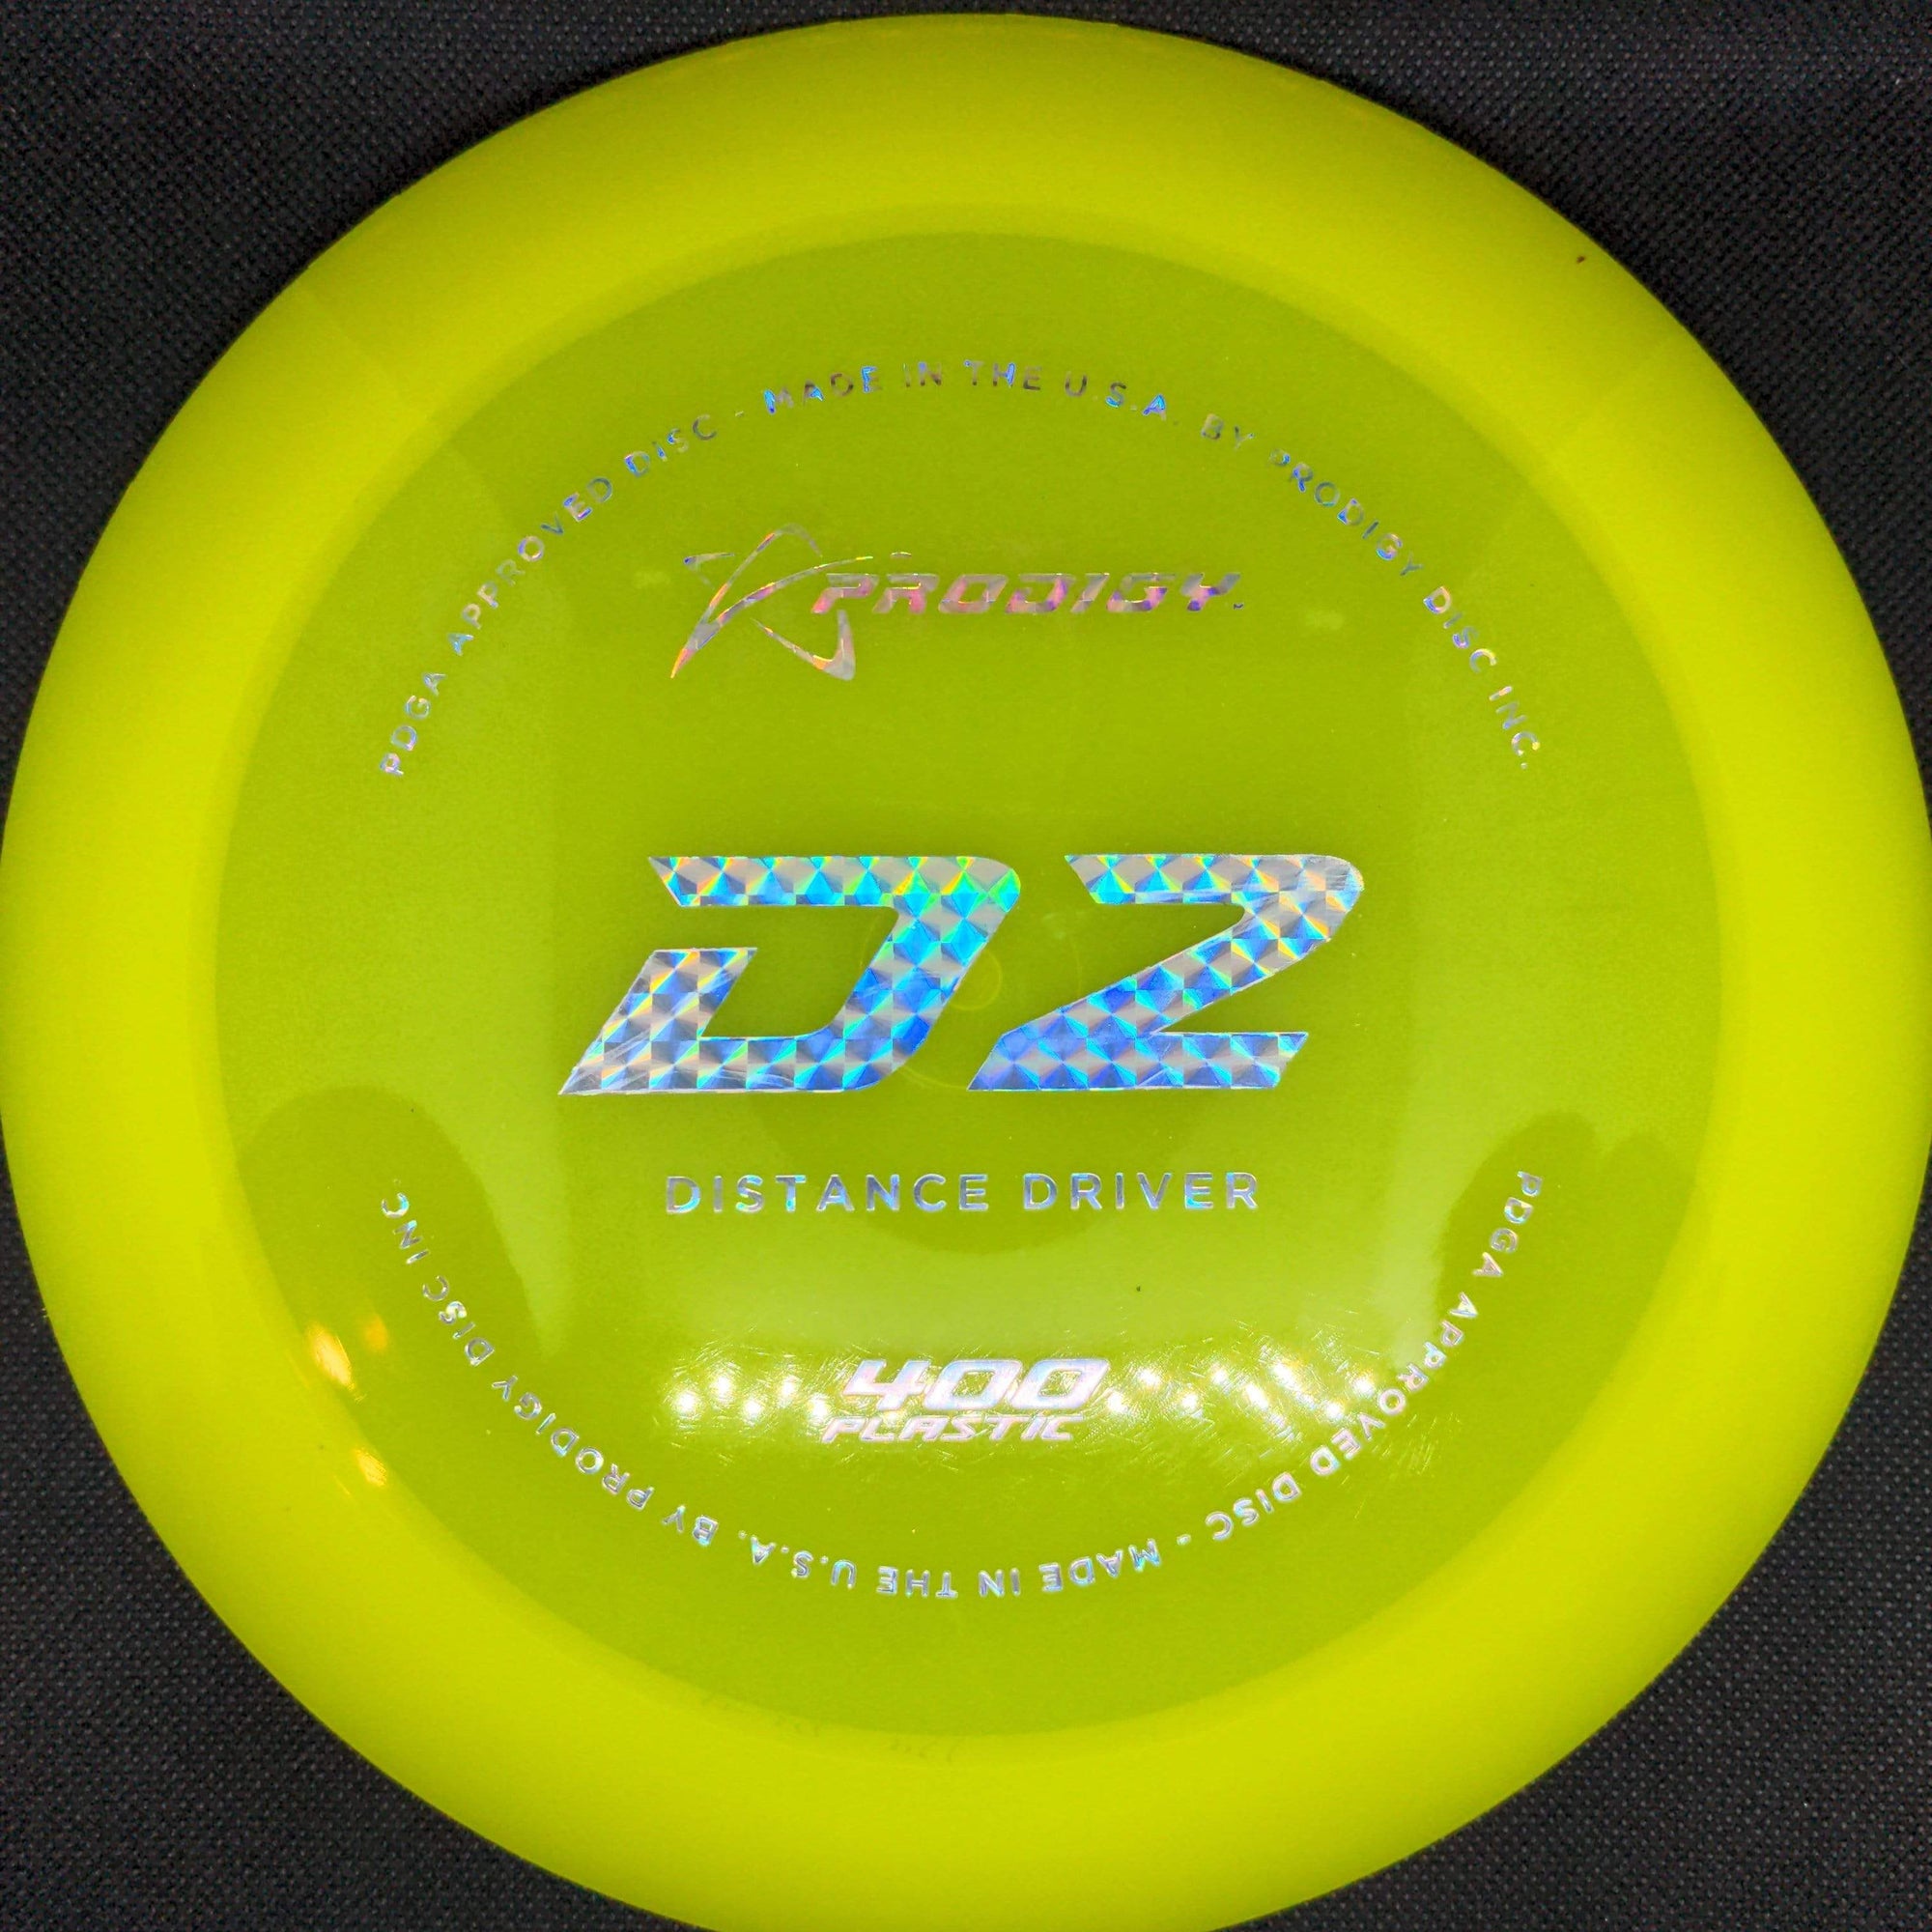 Prodigy Distance Driver Yellow Shimmer Silver Stamp 174g D2 - 400 Plastic